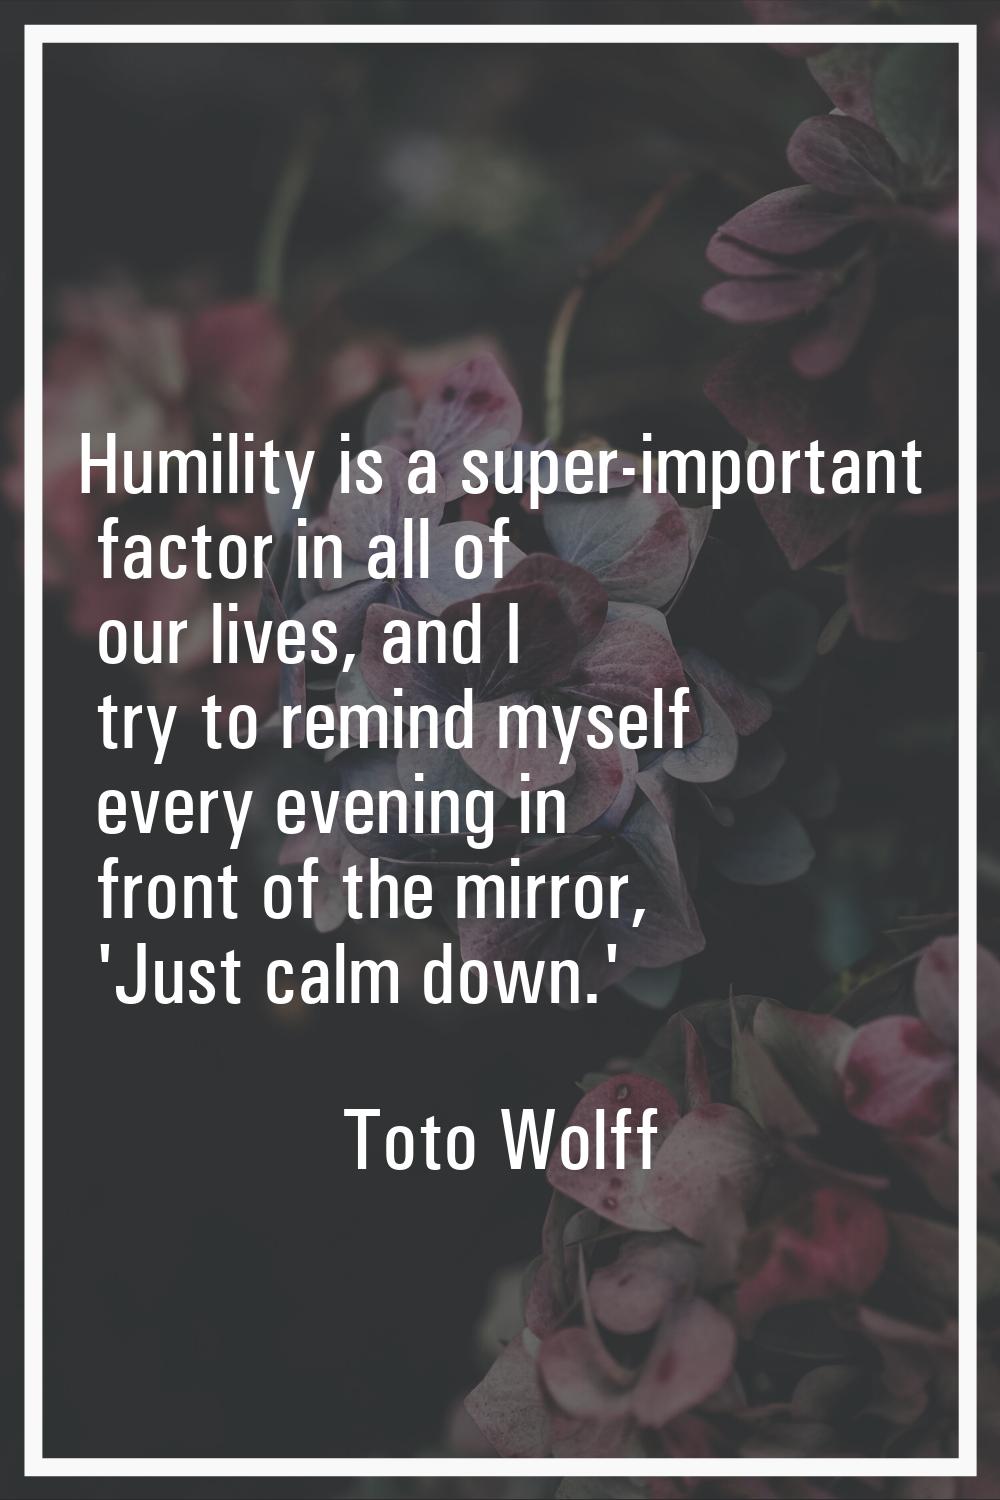 Humility is a super-important factor in all of our lives, and I try to remind myself every evening 